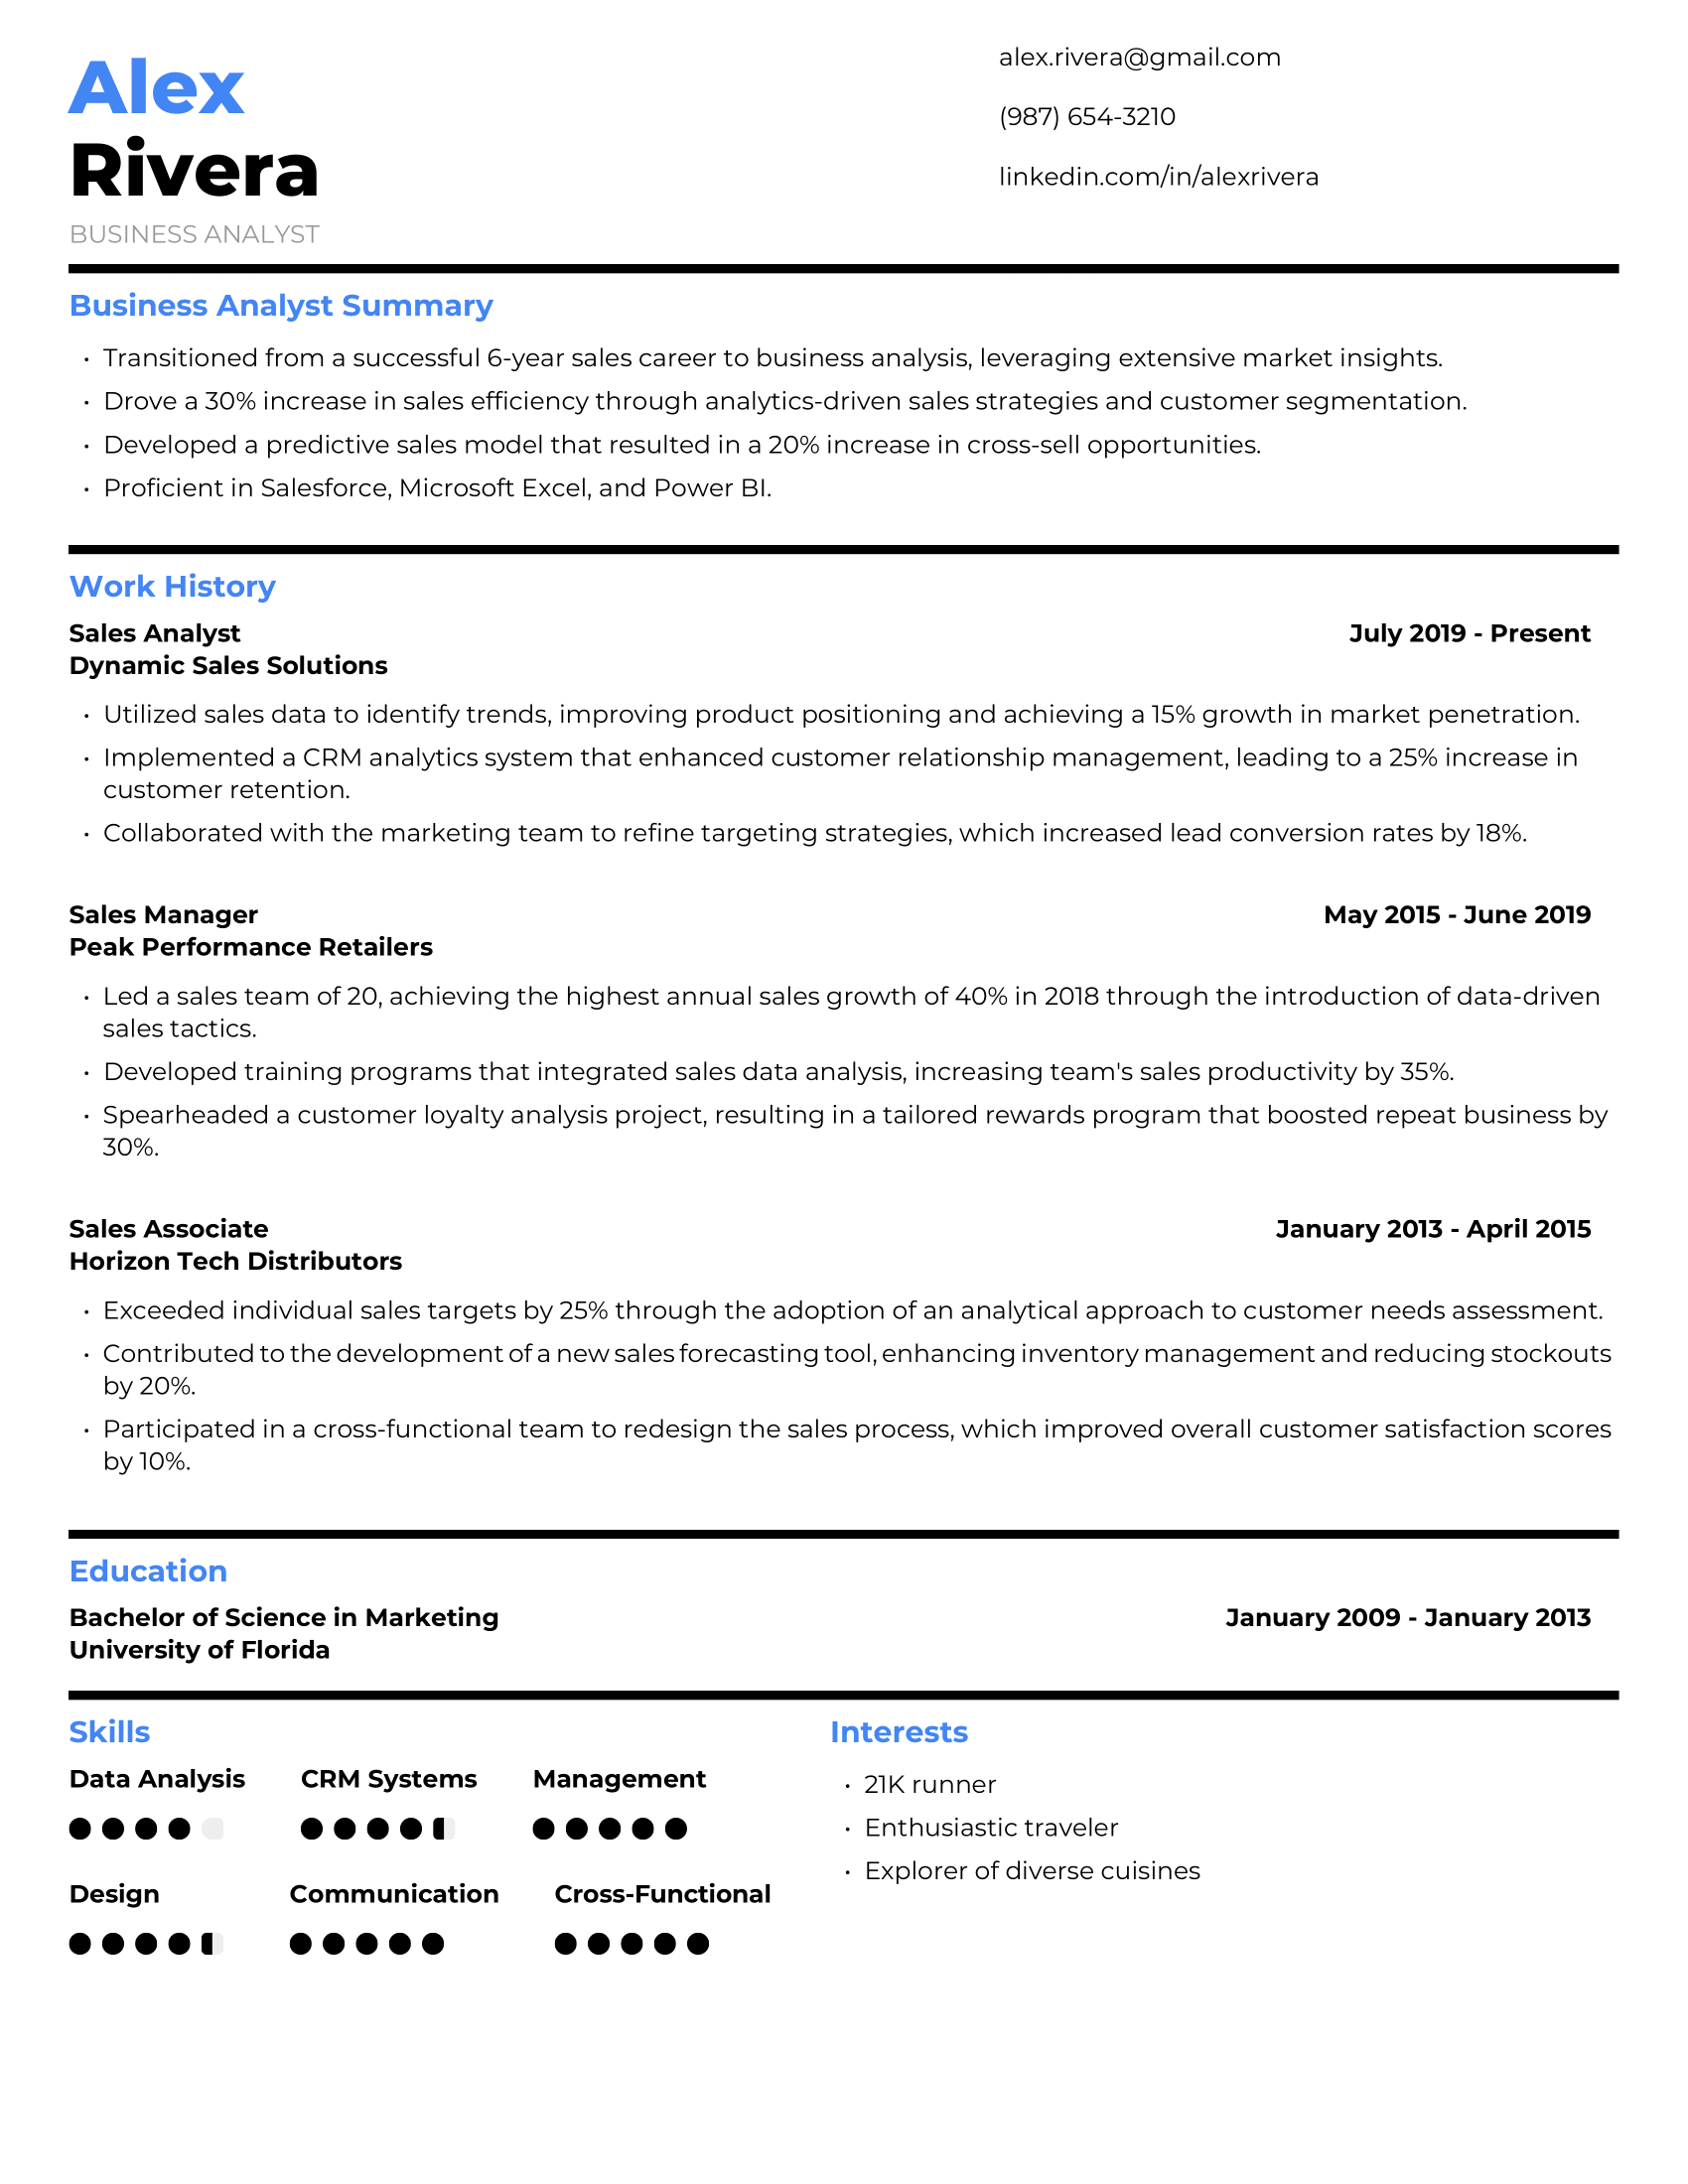 Business Analyst Resume Example #2 - Non-Traditional